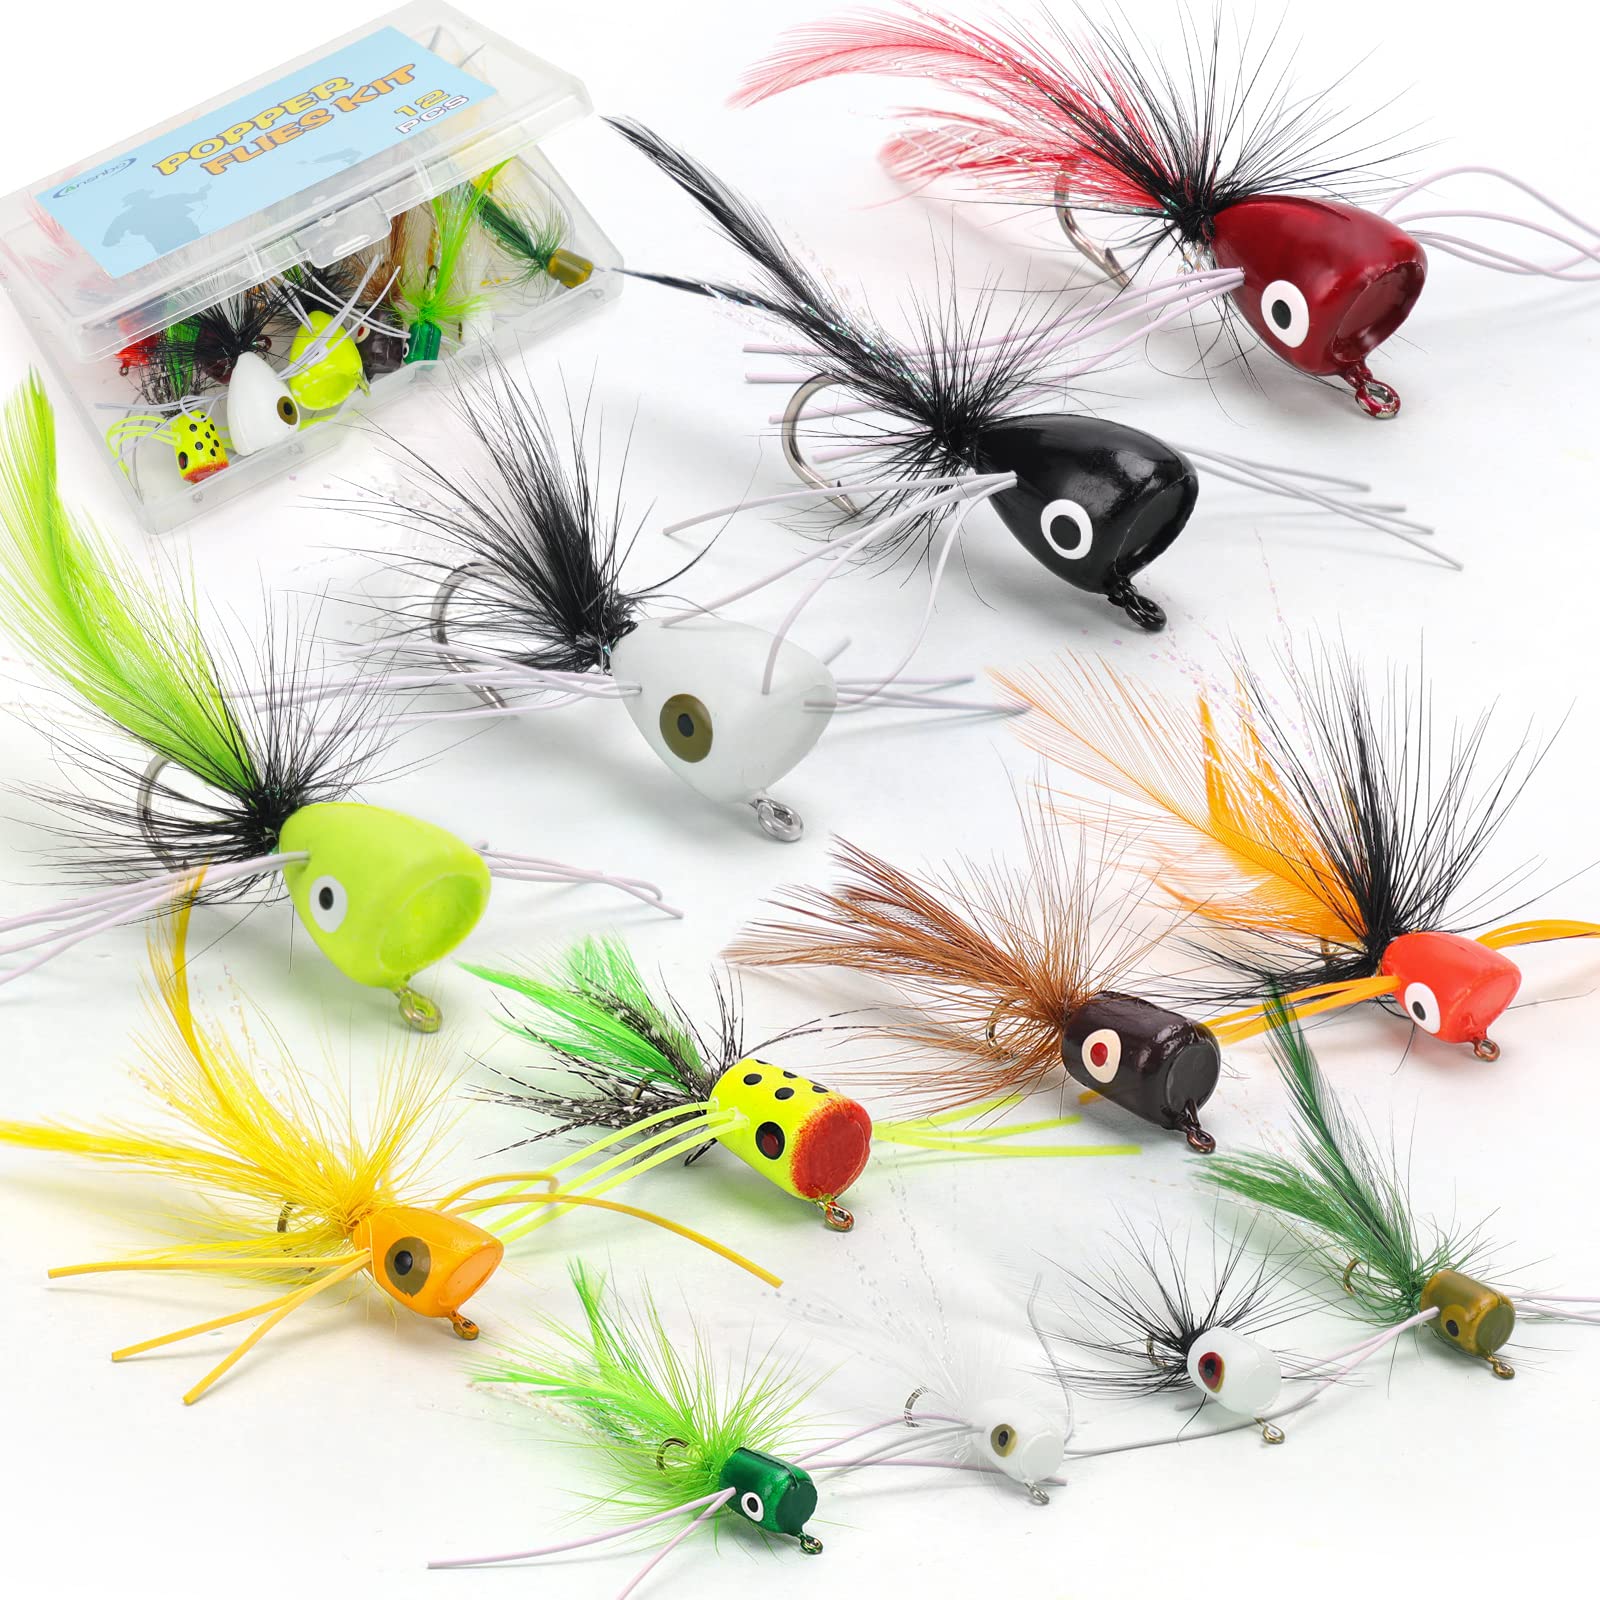 Ansnbo 12PCS Fly Fishing Popper Flies, Fly Popper Lures Bass Panfish  Bluegill Crappie Popping Bug Sunfish